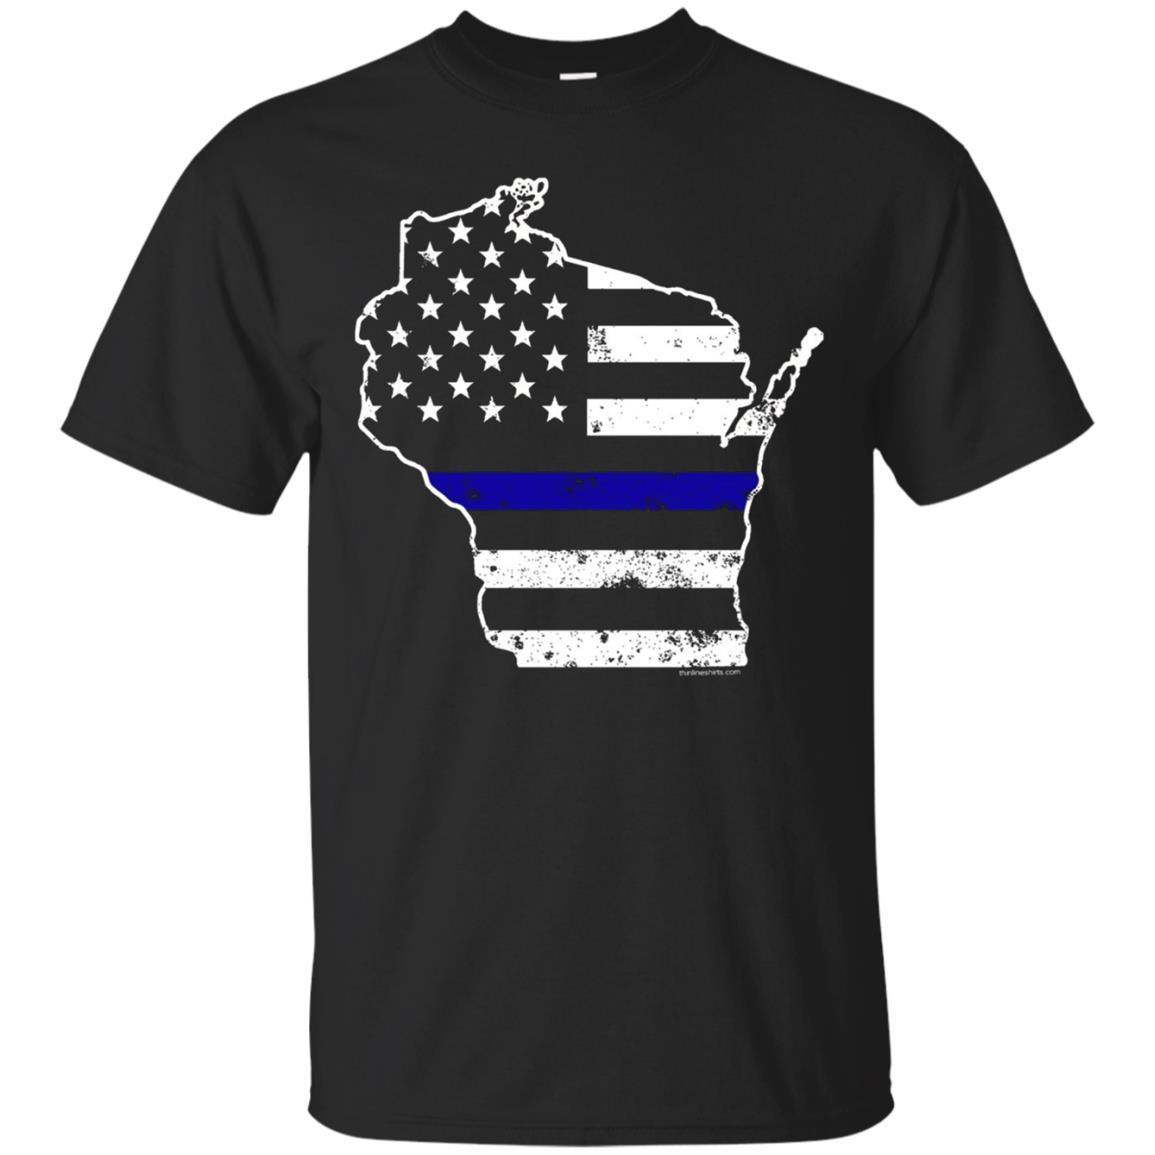 Wisconsin Thin Blue Line Police T-shirt